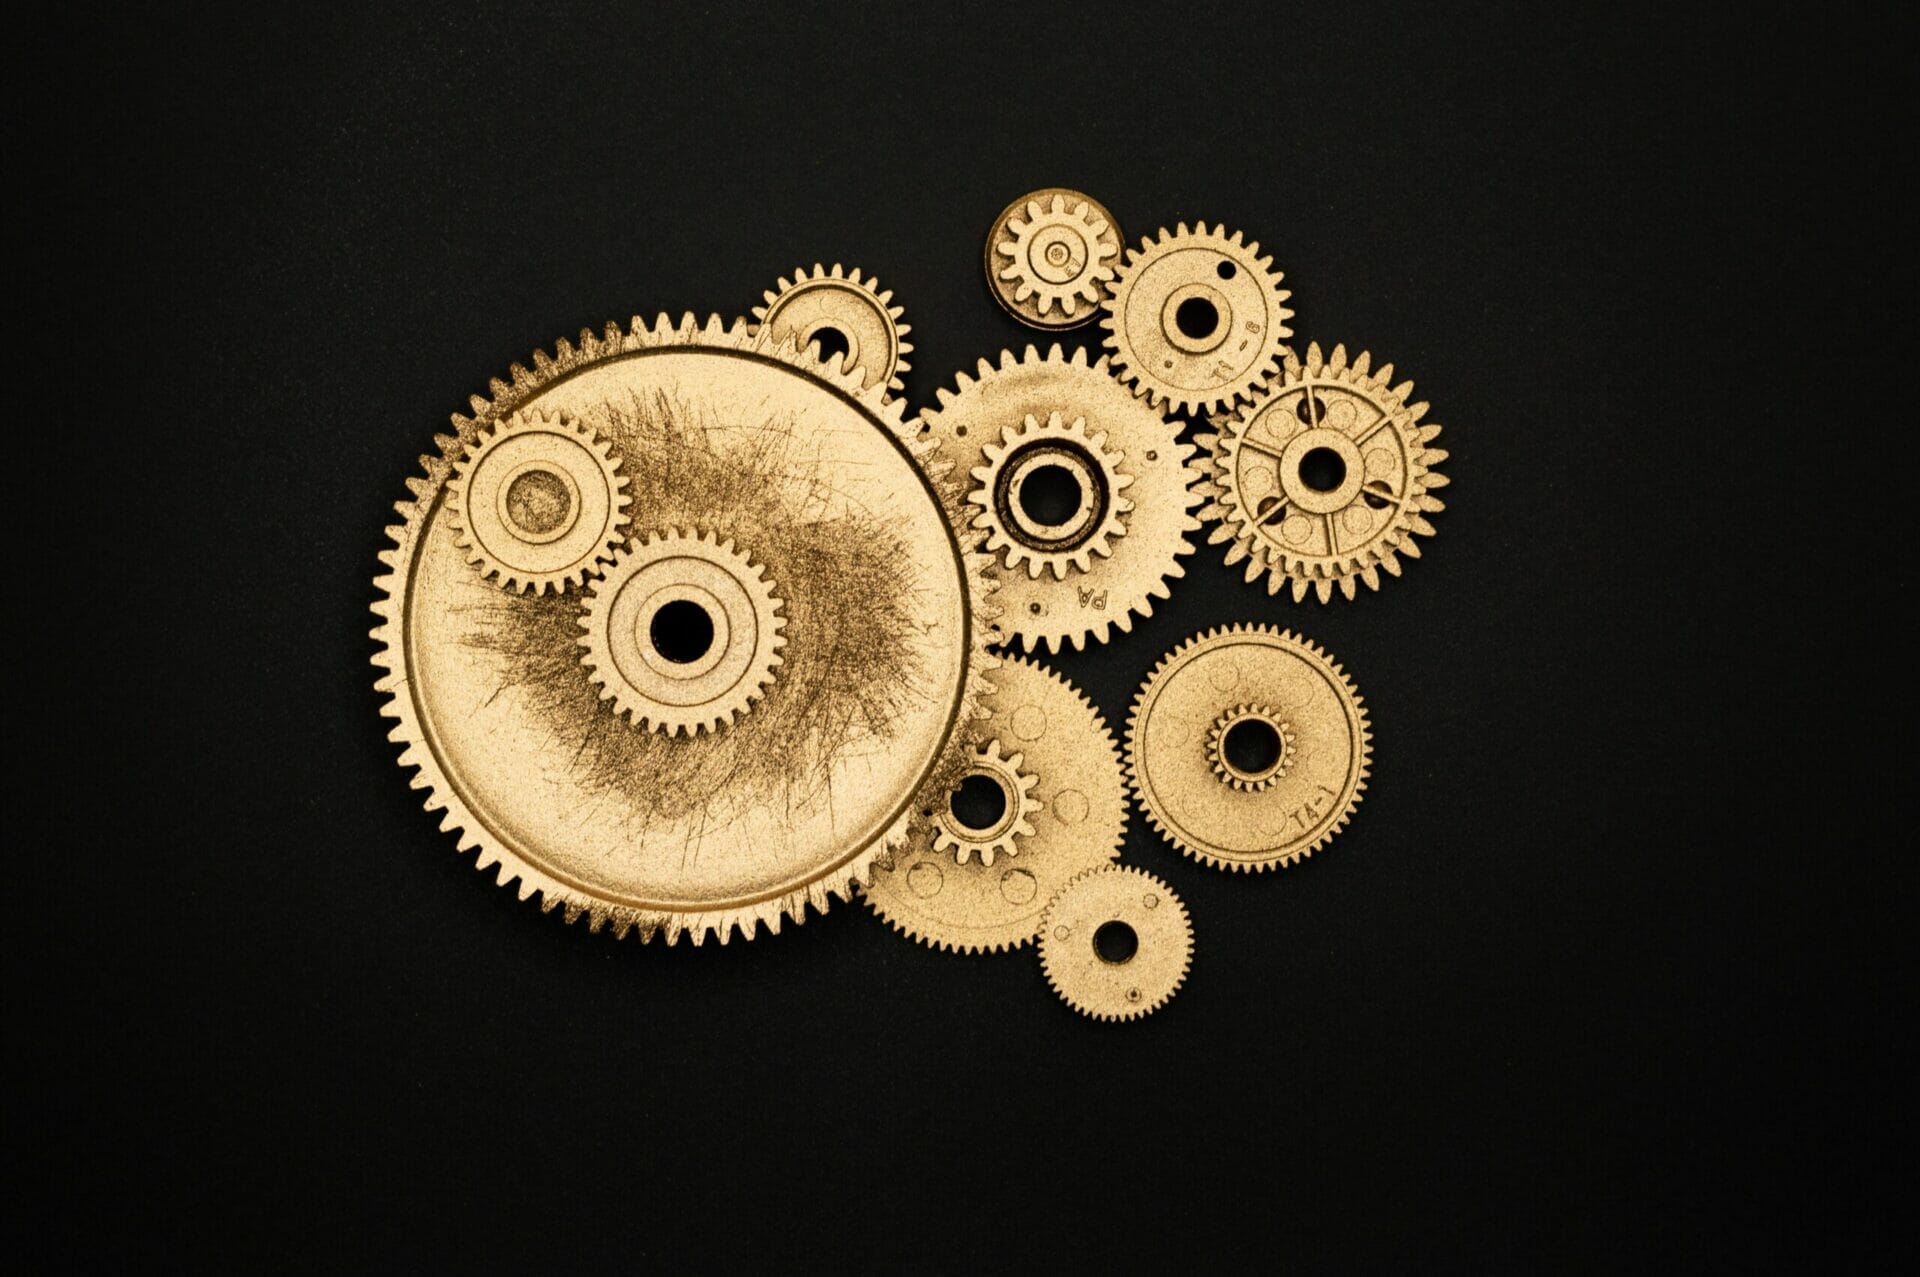 Black background with multiple copper coloured mechanical cogs